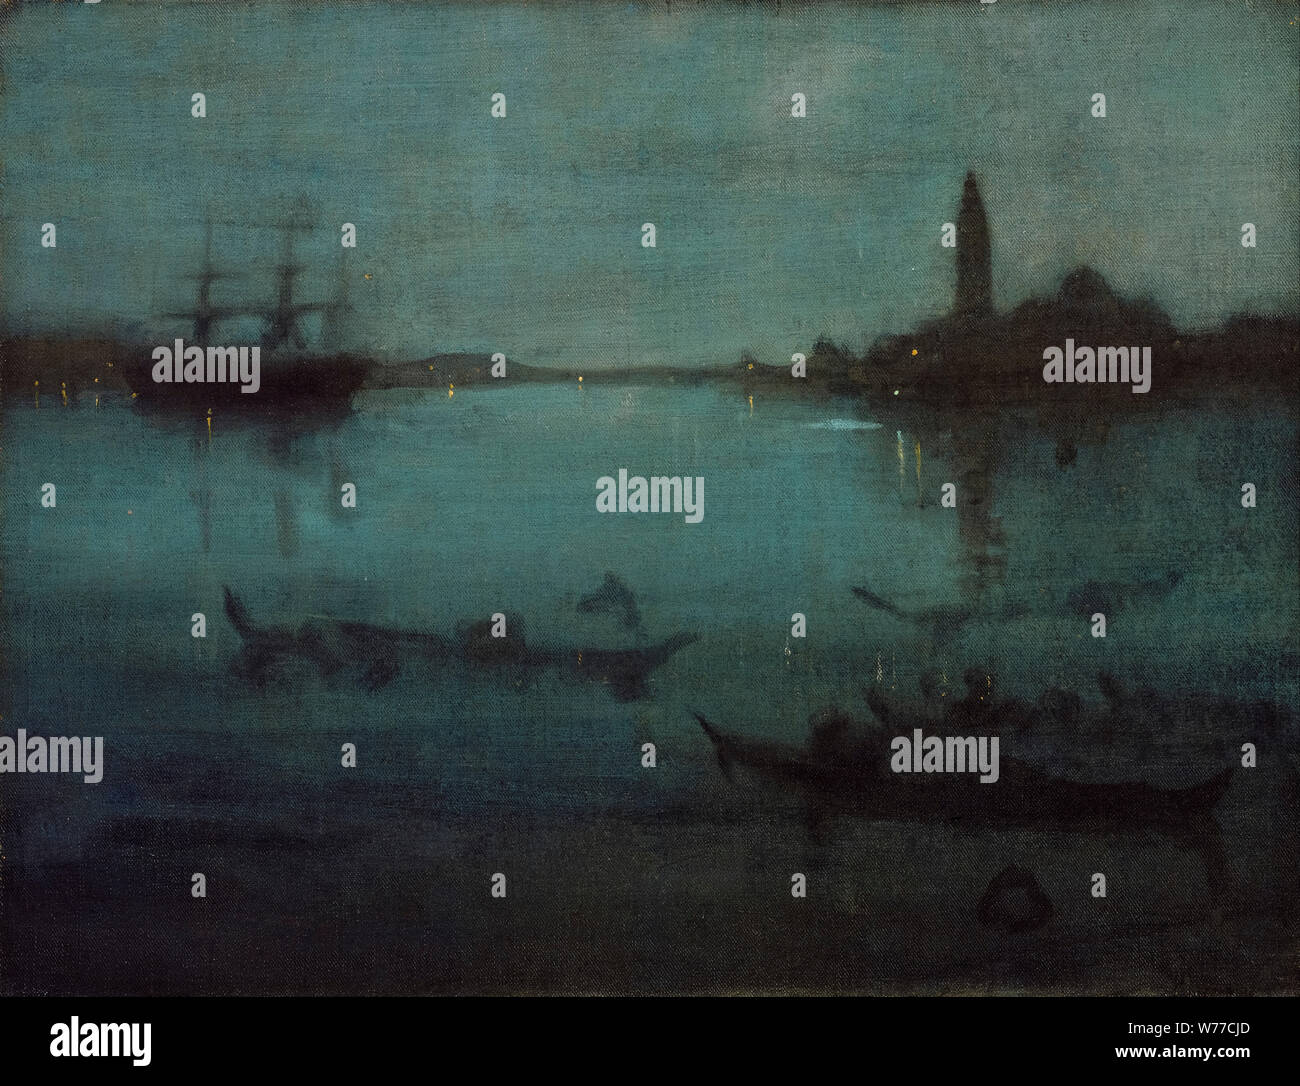 James McNeill Whistler, landscape painting, Nocturne in Blue and Silver, The Lagoon, Venice, 1879-1880 Stock Photo